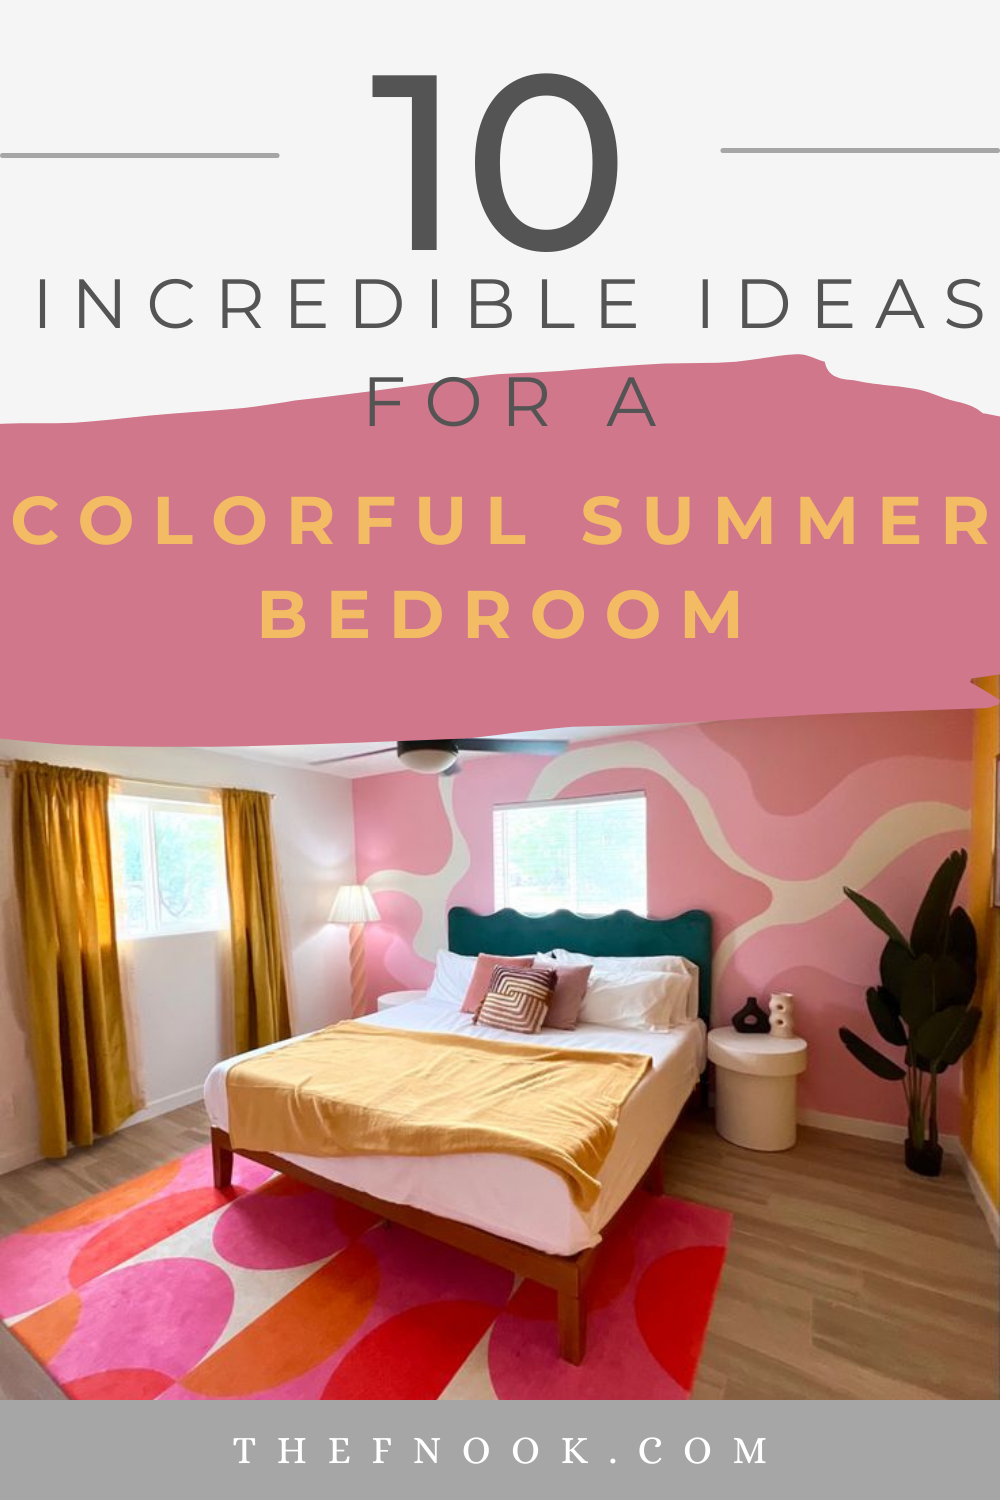 10 Incredible Ideas for a Colorful Summer Bedroom